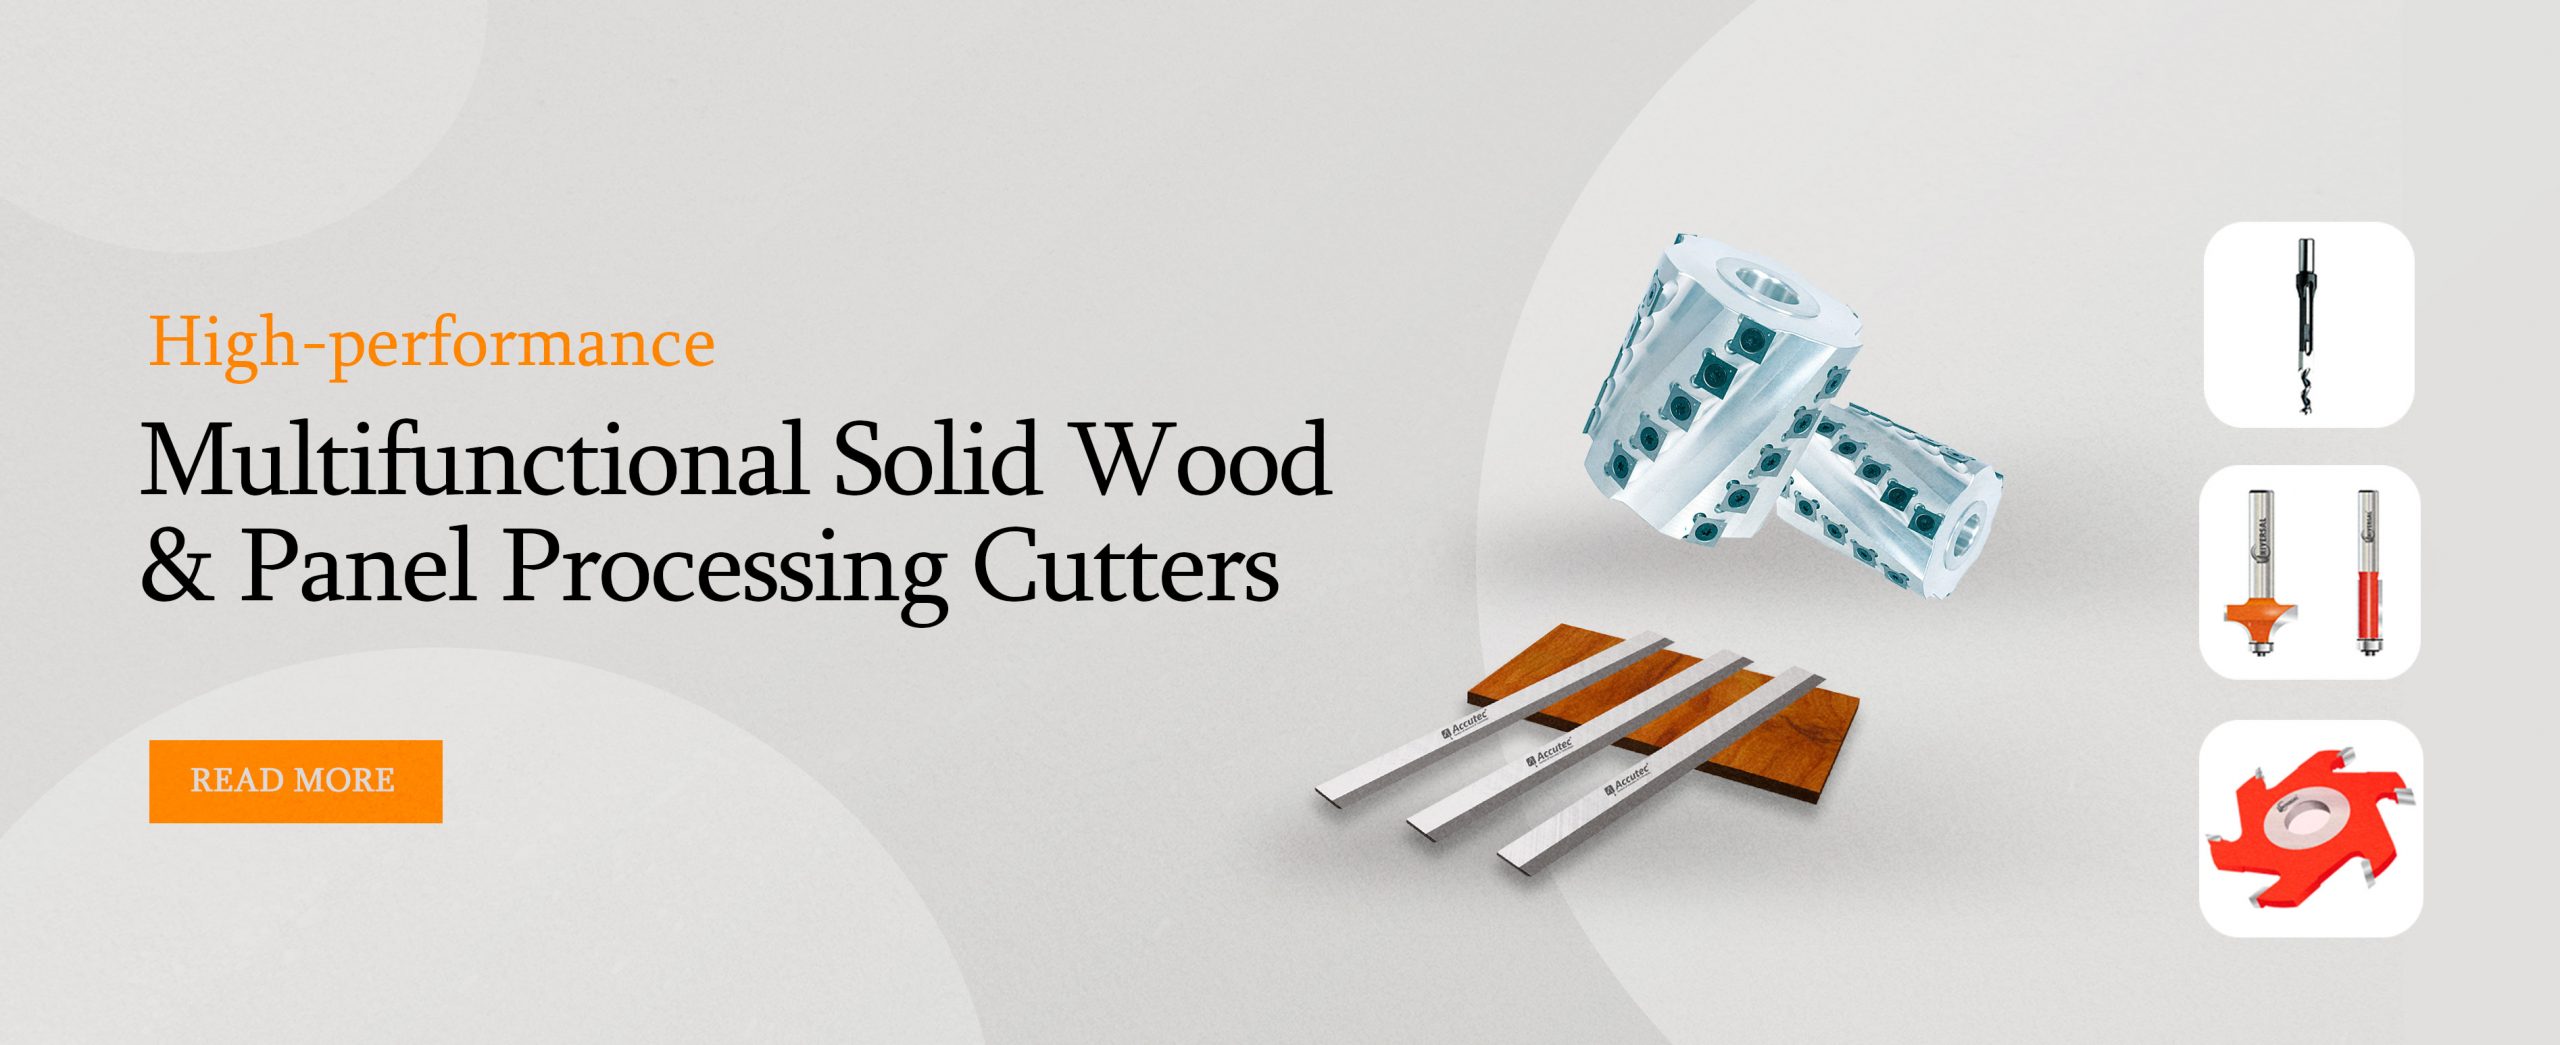 Hi tech Agencies - Solid wood and Panel processing cutters